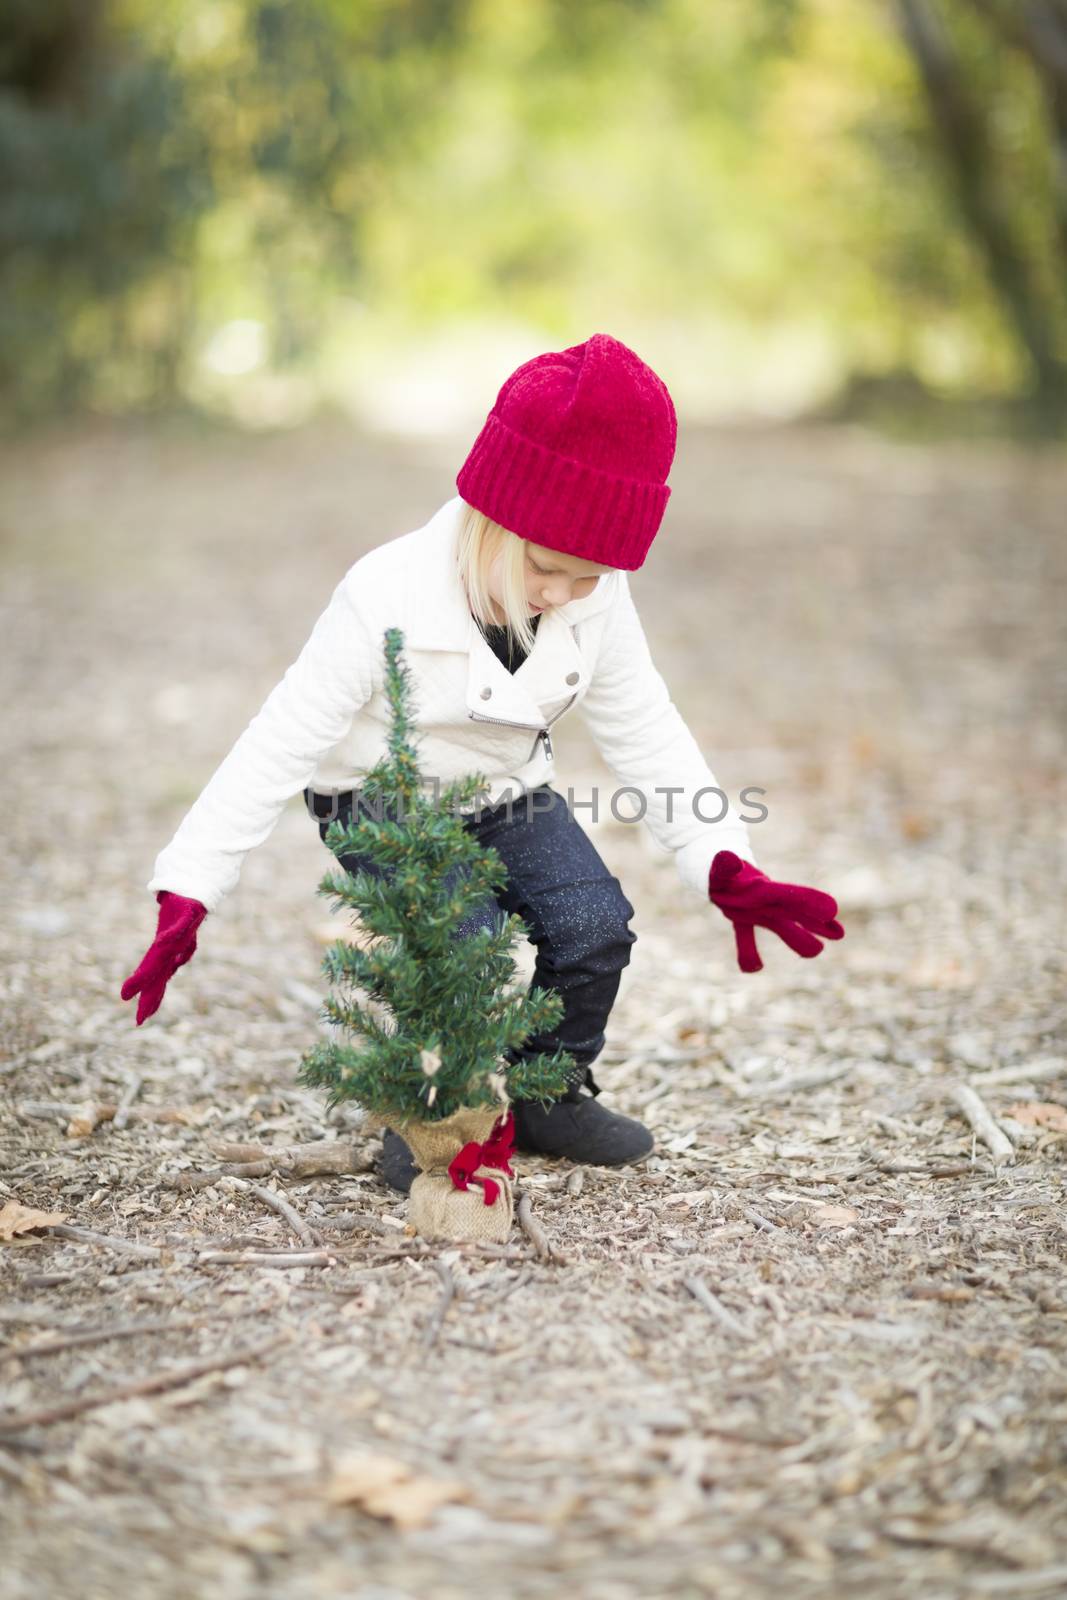 Baby Girl In Red Mittens and Cap Near Small Christmas Tree Outdoors.